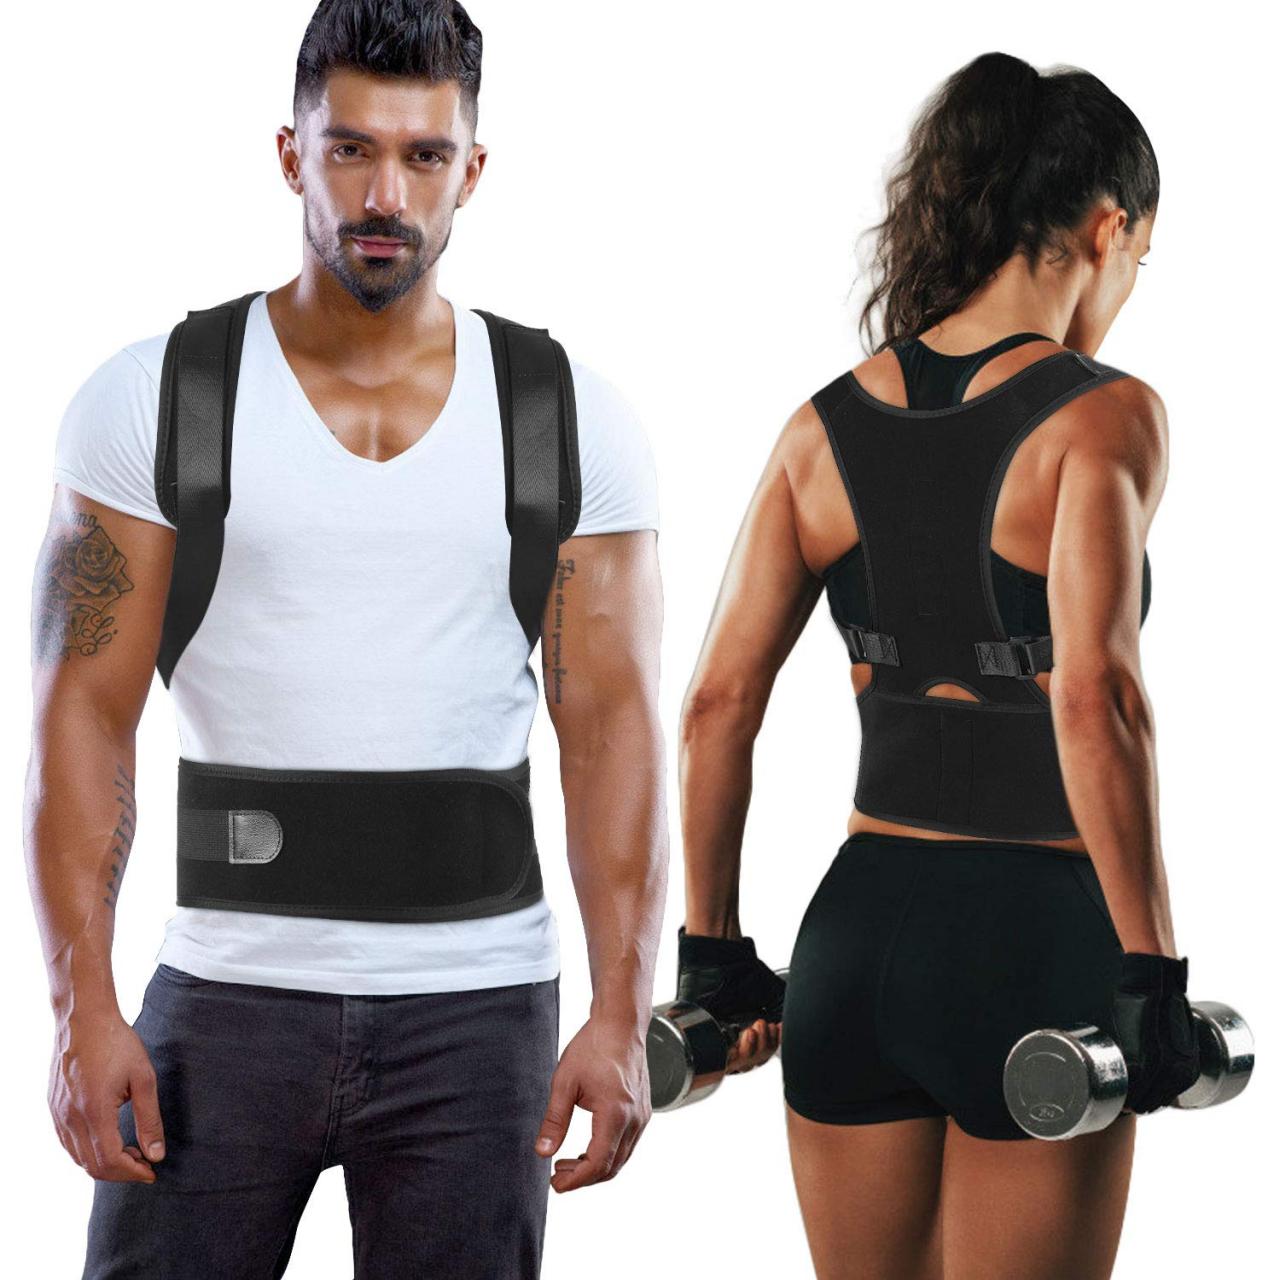 Back Brace Posture Corrector - Shoulder Support Trainer for Pain Relief |  Improves Posture and Provides Lumbar Support,for Men and Women Supports  Correct Posture Upper and Lower Back Lumbar- Buy Online in